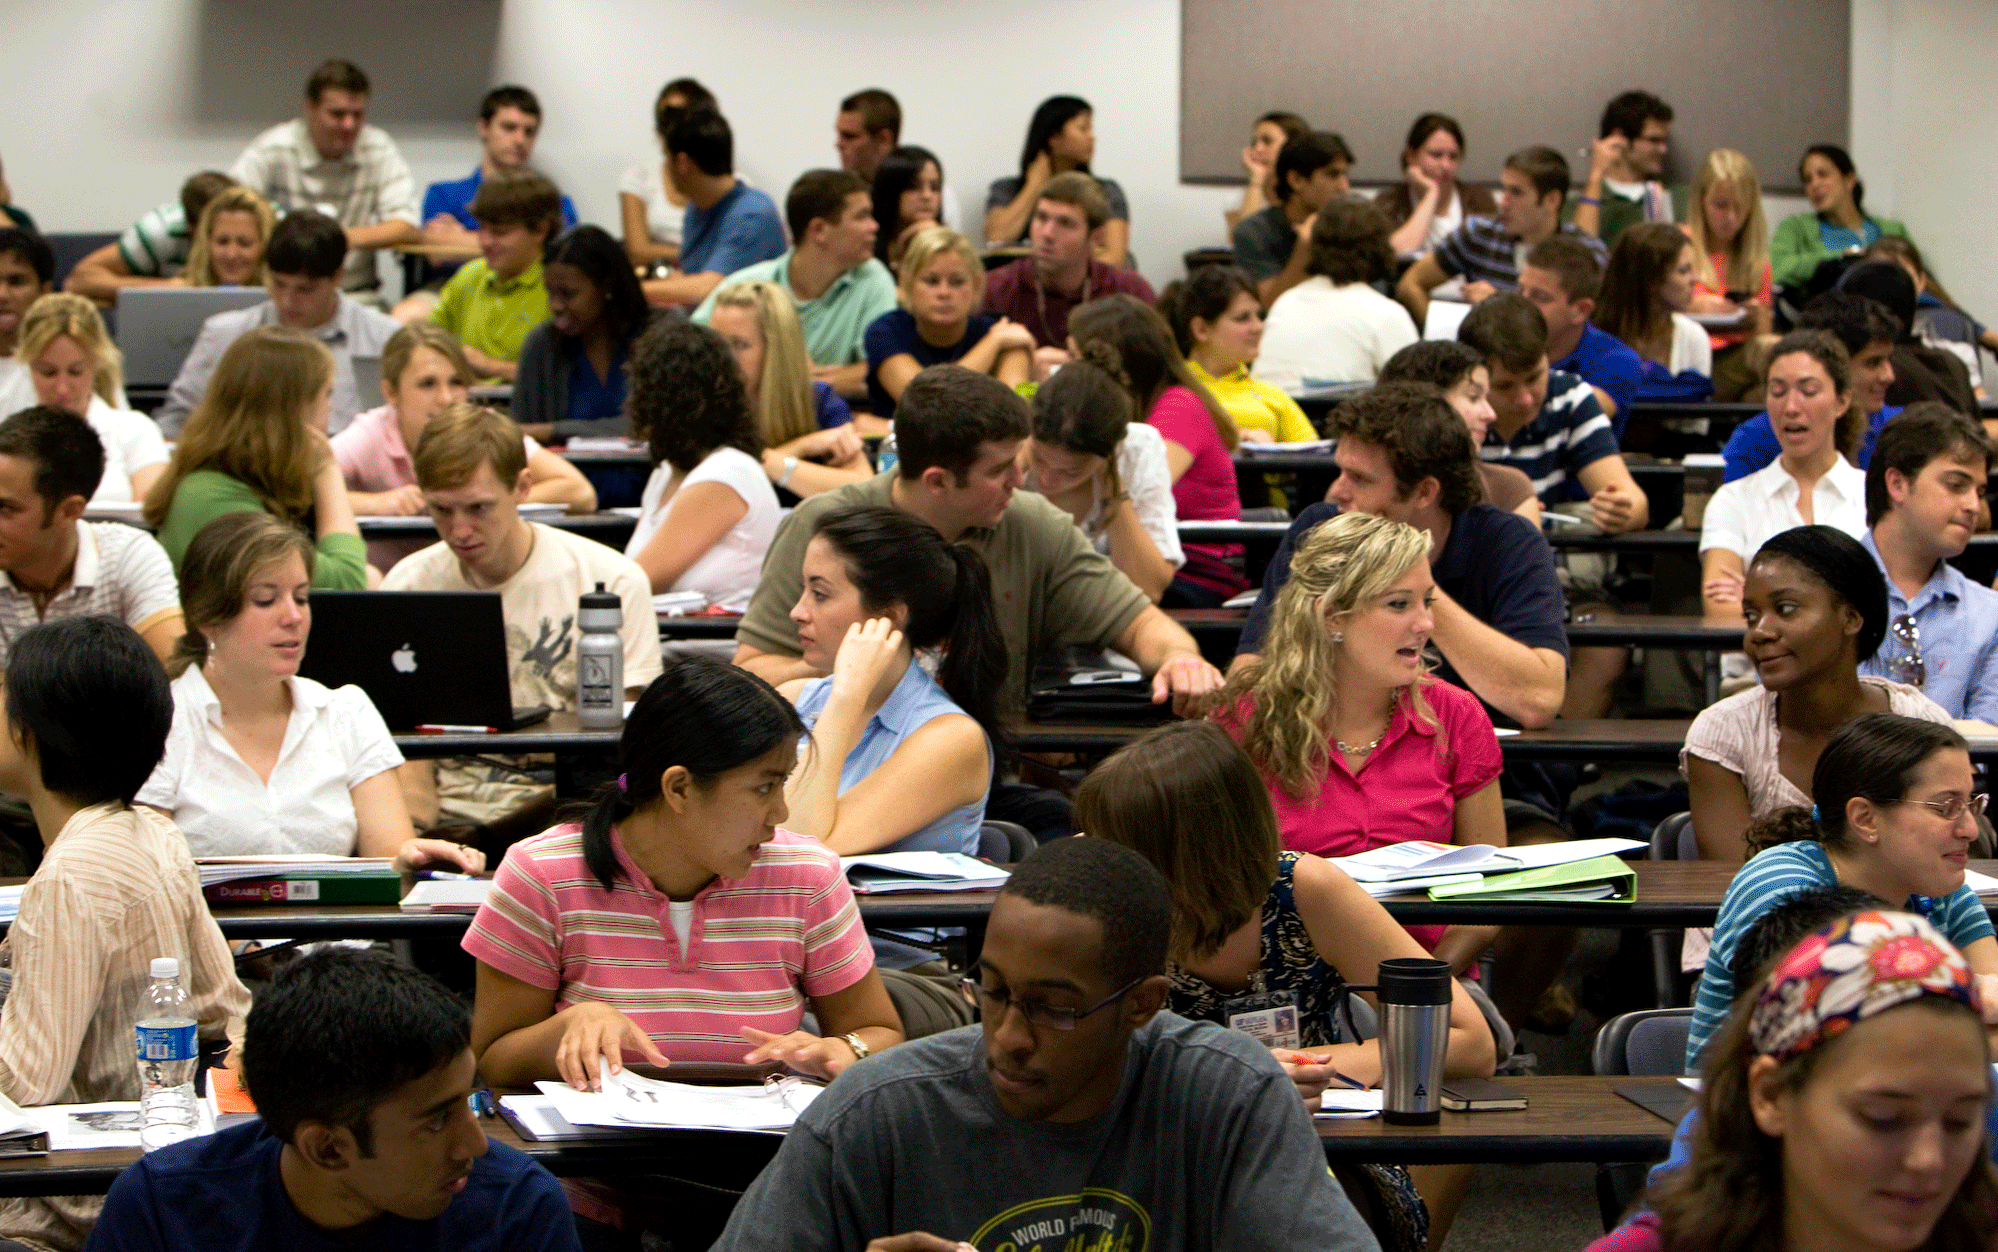 10 Conversations Everyone Has In Their Heads On The First Day Of Classes